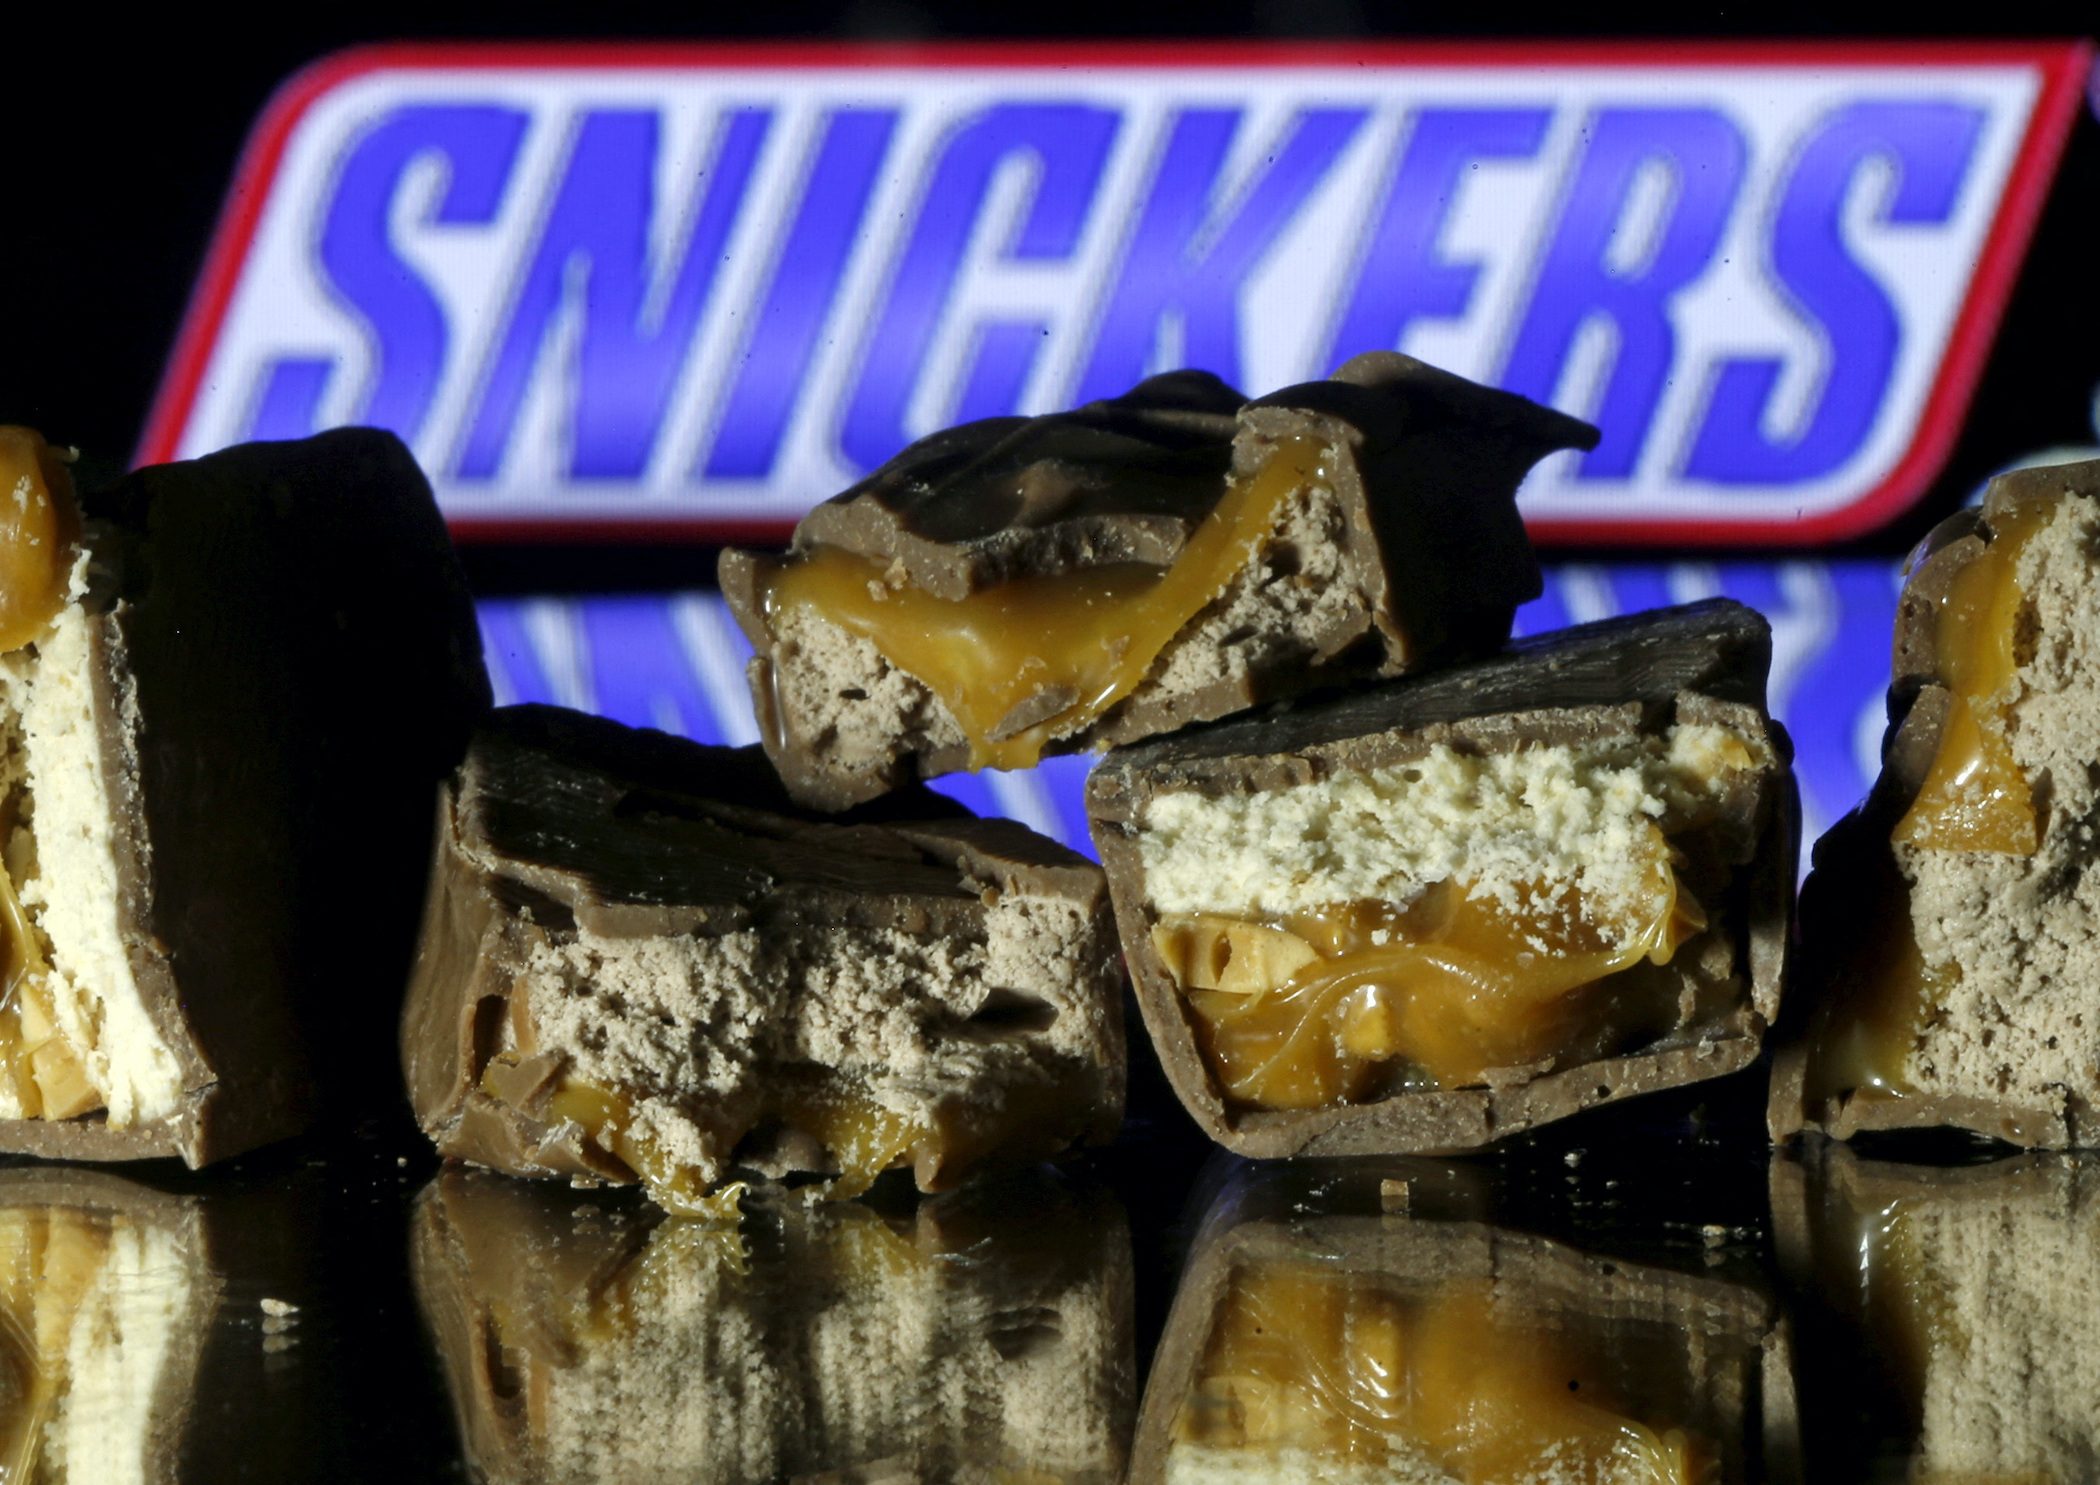 Snickers maker apologizes for advert suggesting Taiwan is a country